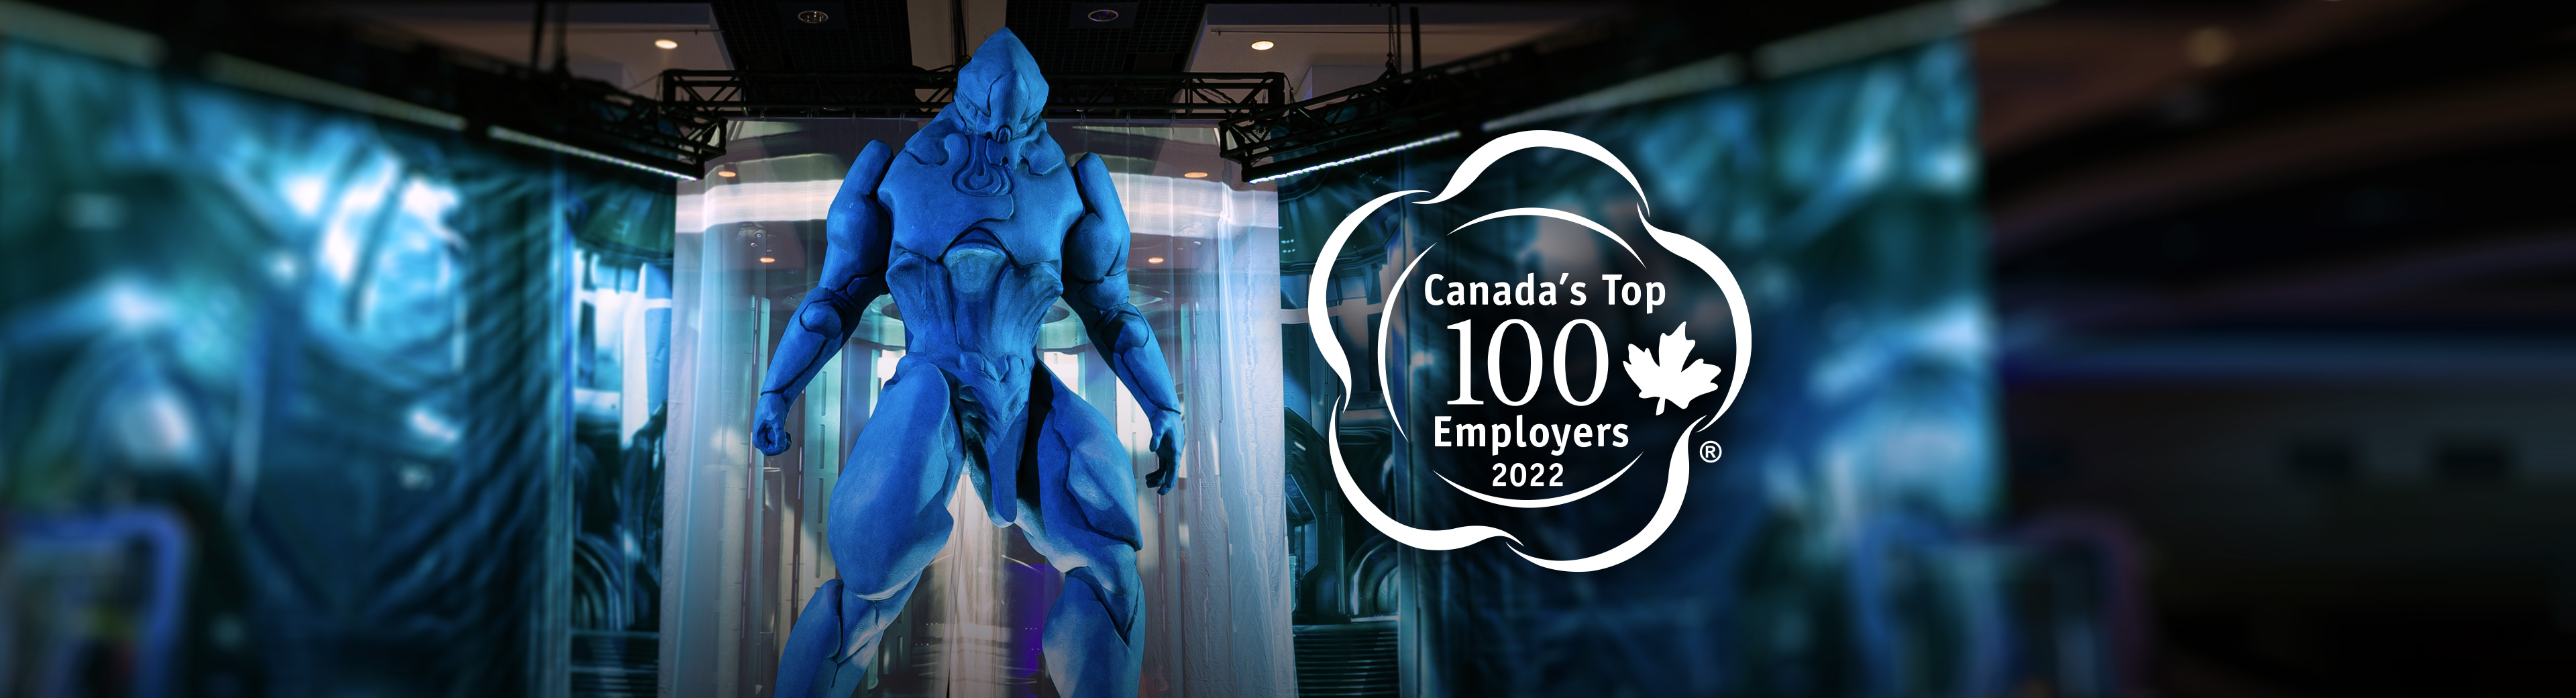 DIGITAL EXTREMES IS A 'TOP 100' EMPLOYER IN CANADA